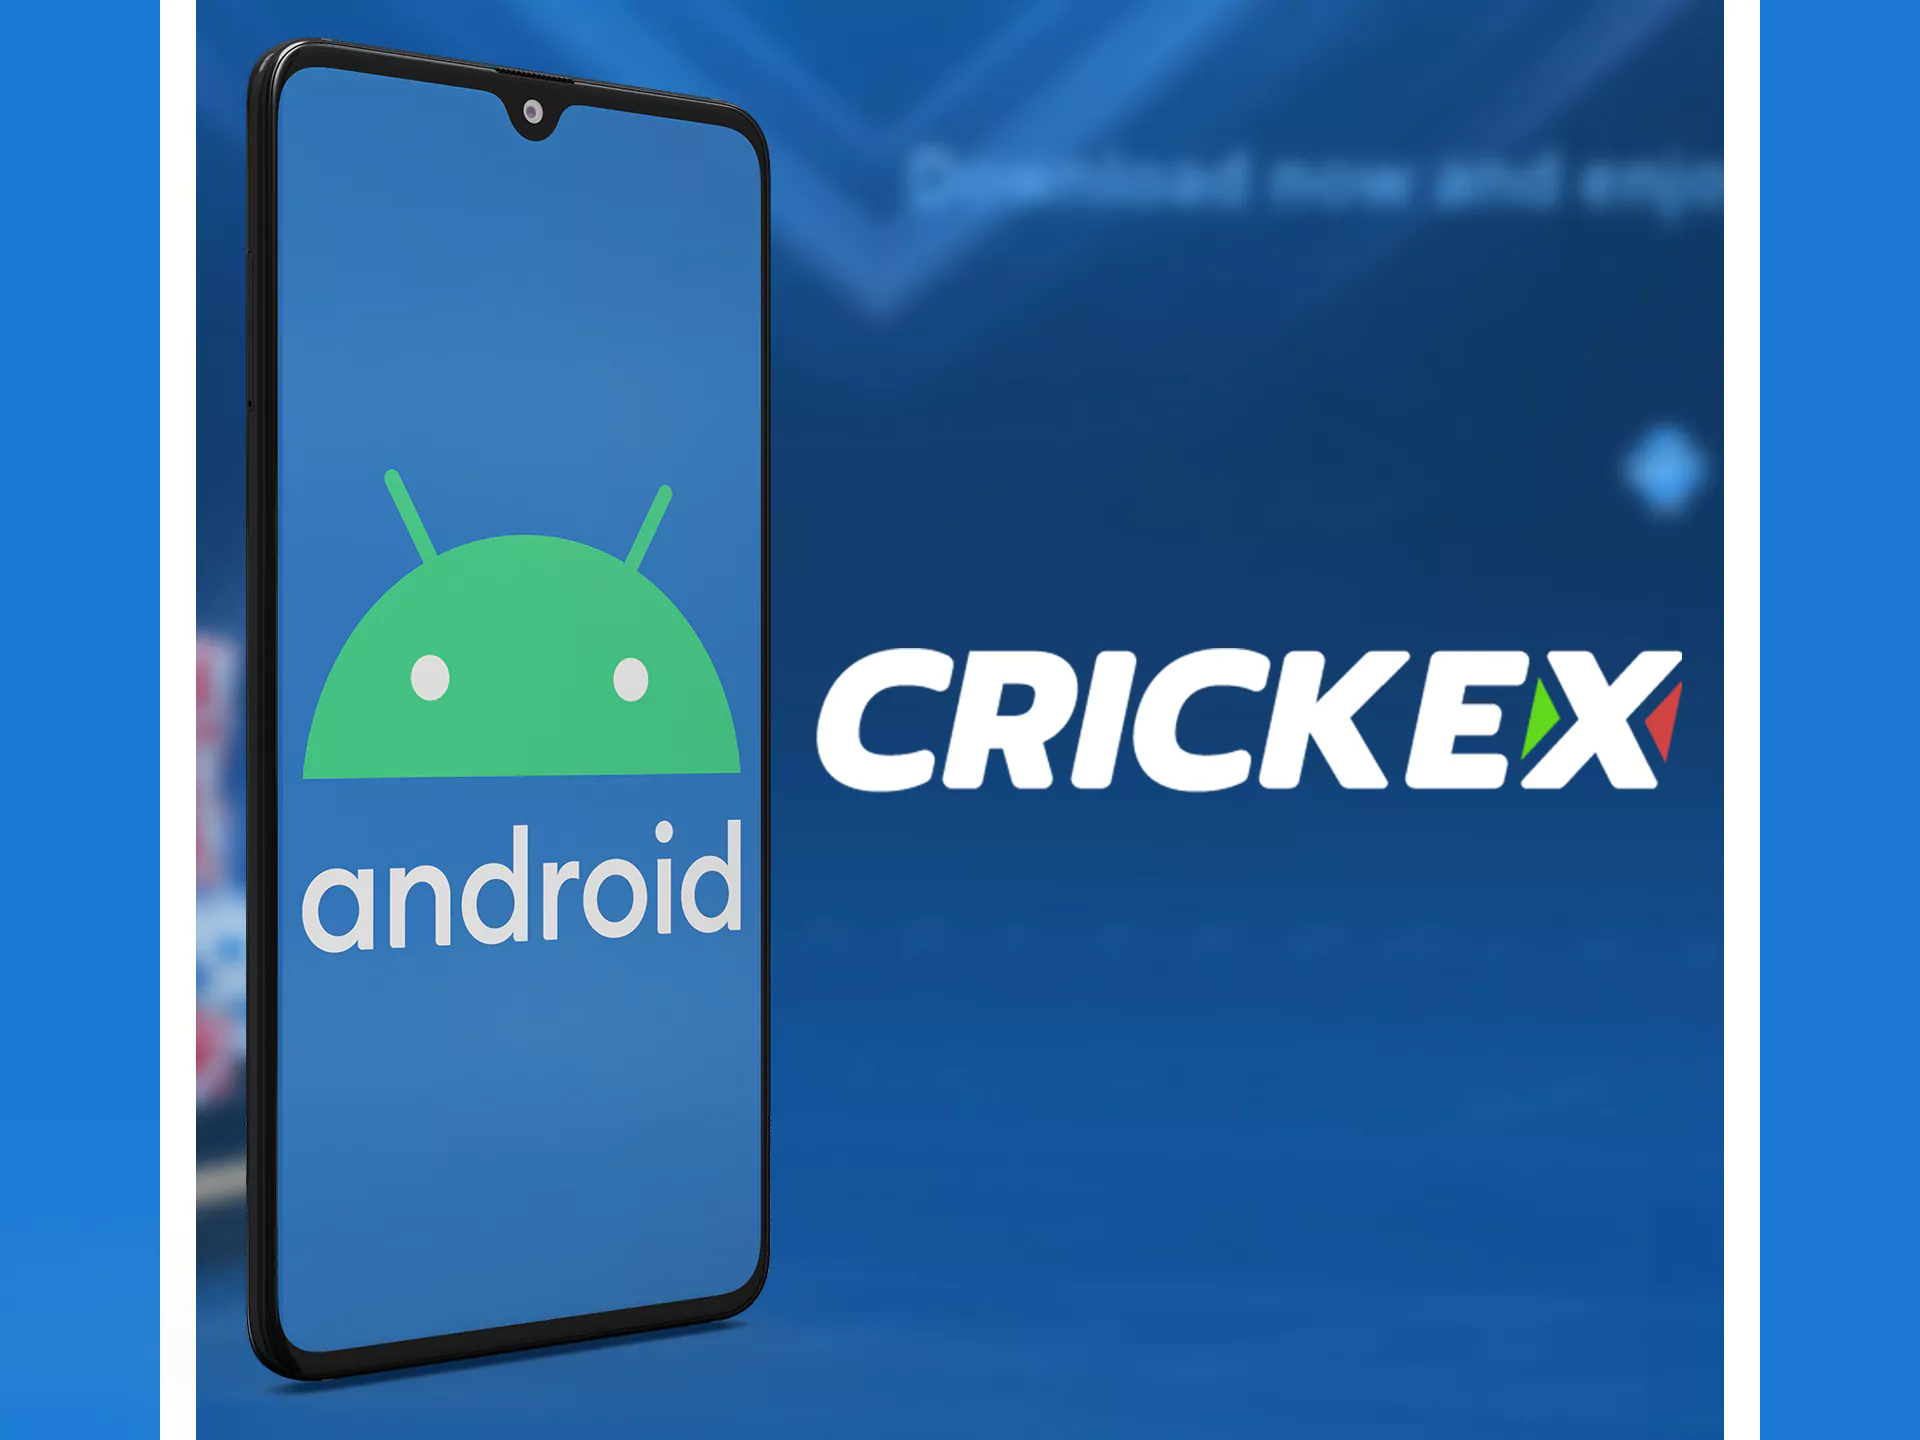 The Crickex app is stable on Android devices.